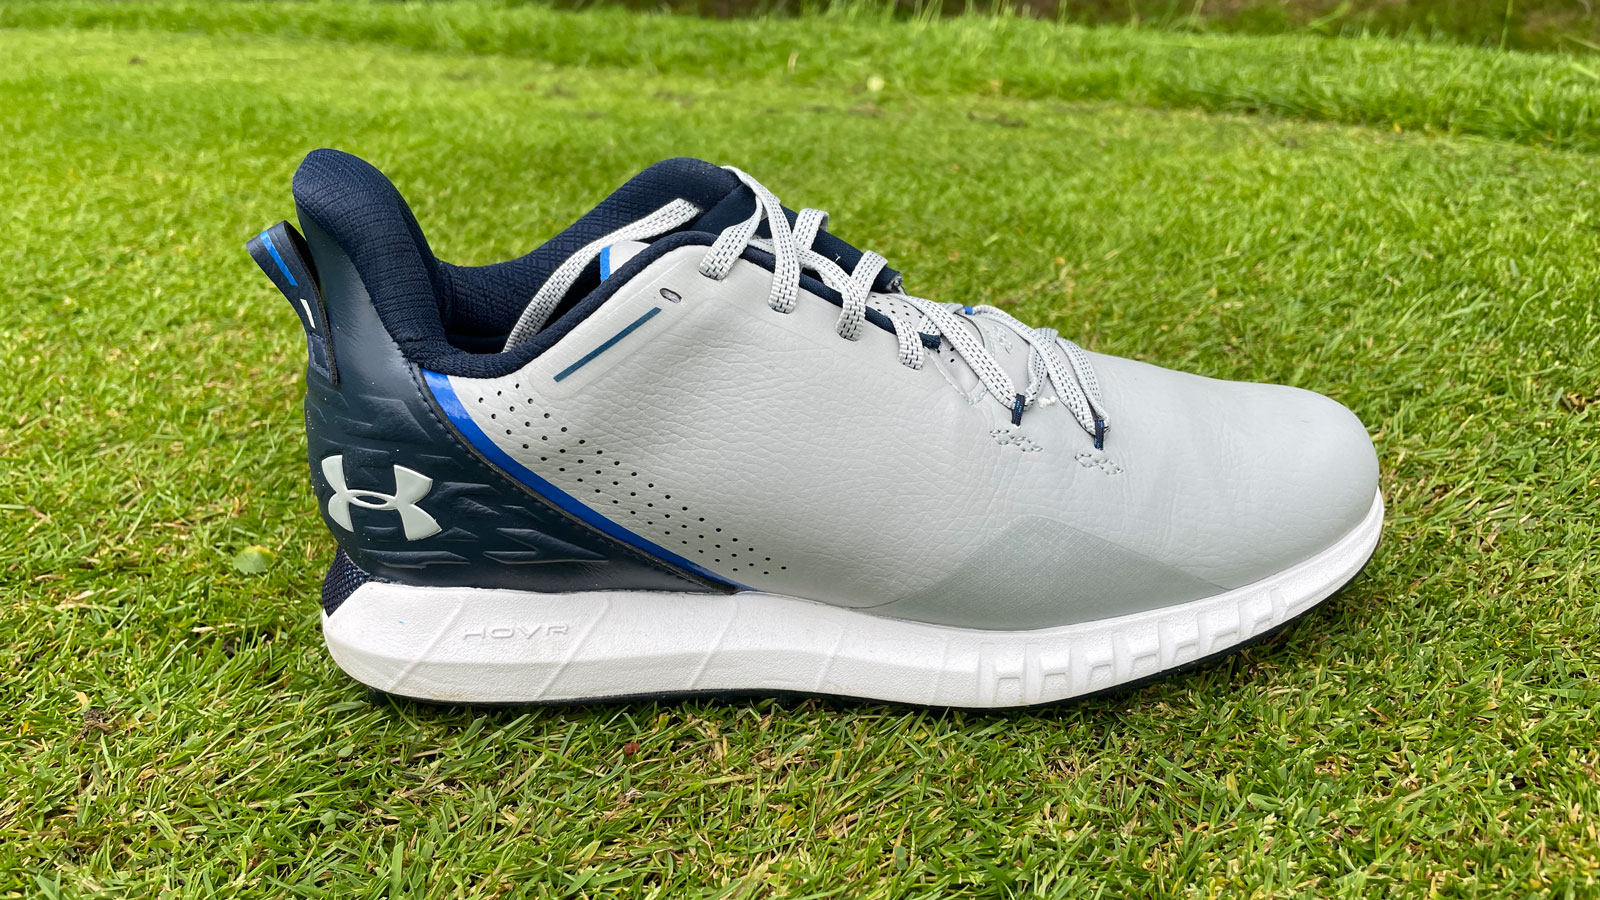 Under Armour Drive Golf Shoe Review | Golf